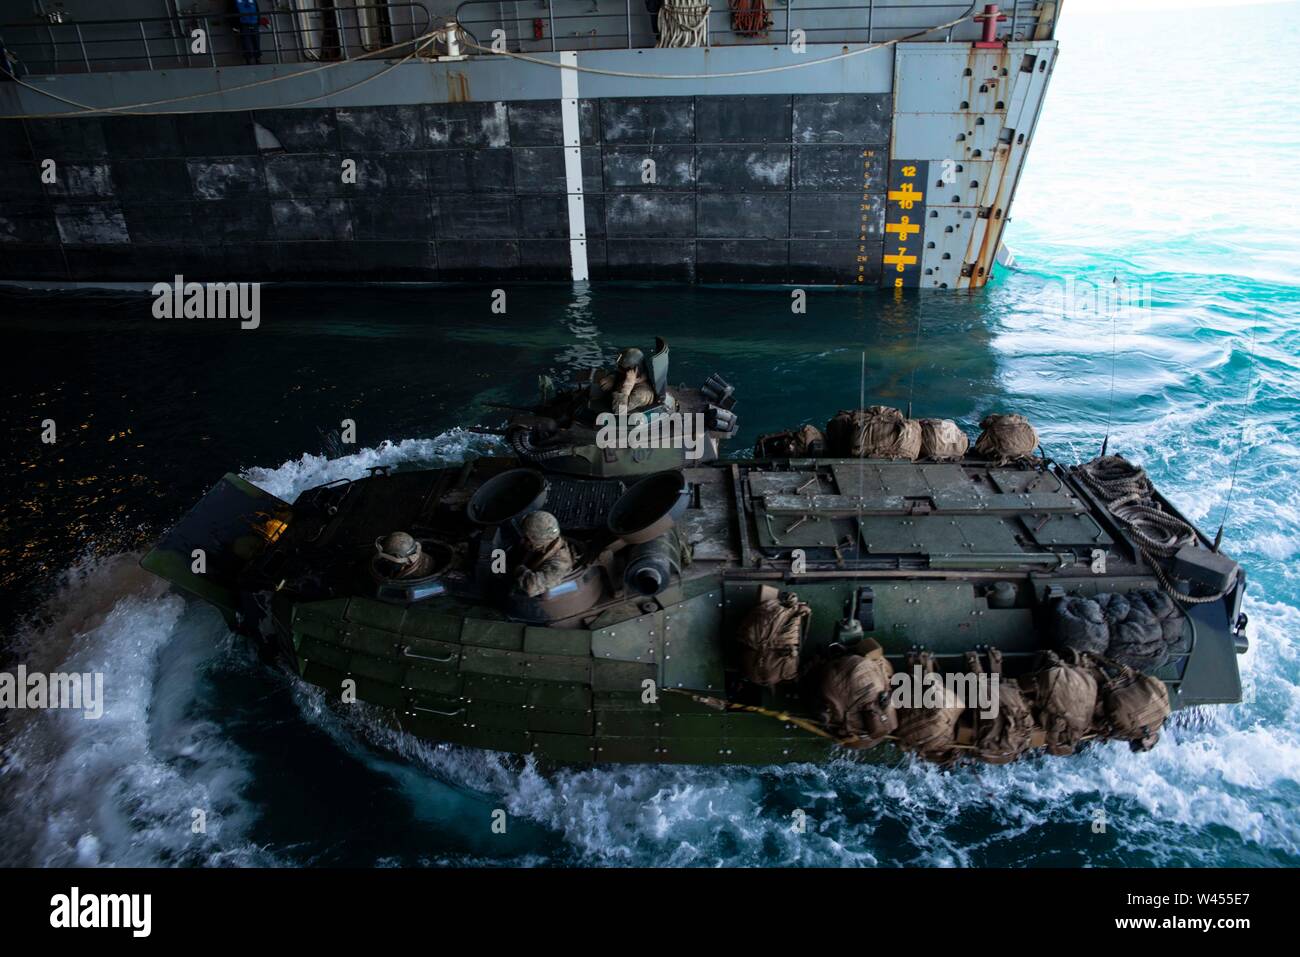 190718-N-DX072-1185 STANAGE BAY, Australia (July 18, 2019) An assault amphibious vehicle (AAV), assigned to the 31st Marine Expeditionary Unit (MEU), enters the well deck of the amphibious transport dock ship USS Green Bay (LPD 20). Green Bay, part of the Wasp Expeditionary Strike Group, with embarked 31st MEU, is currently participating in Talisman Sabre 2019 off the coast of Northern Australia. A bilateral, biennial event, Talisman Sabre is designed to improve U.S. and Australian combat training, readiness and interoperability through realistic, relevant training necessary to maintain region Stock Photo